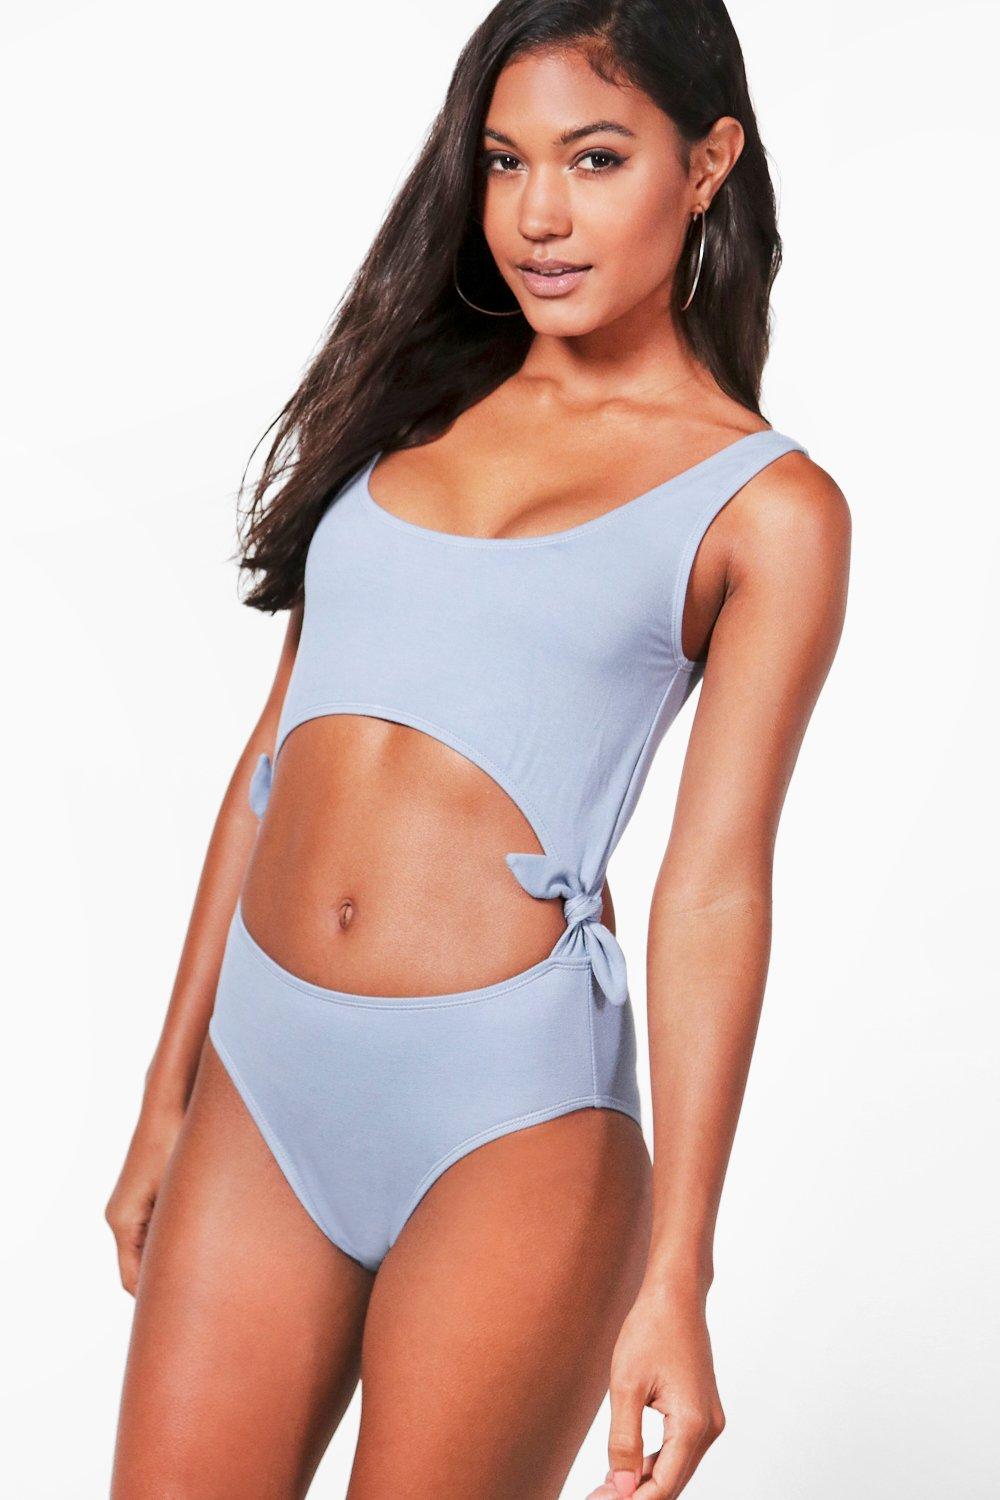 This is one of the cutest spring break bathing suits